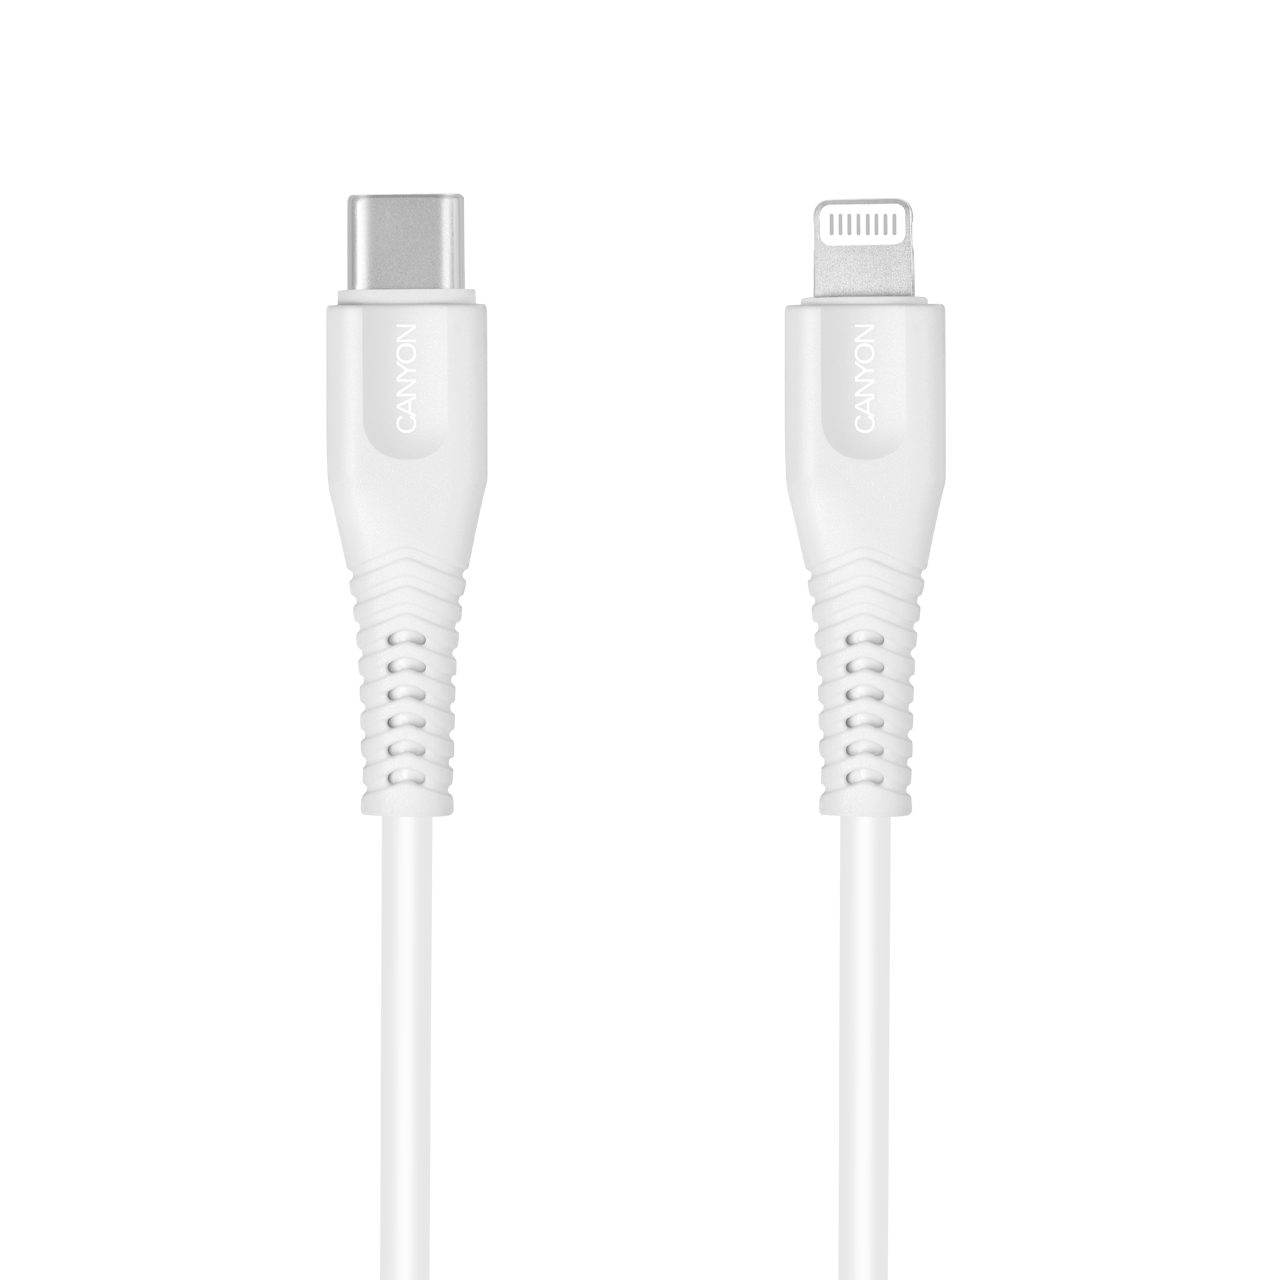 Photos - Cable (video, audio, USB) Canyon MFI-4 1.2 m White CNS-MFIC4W 